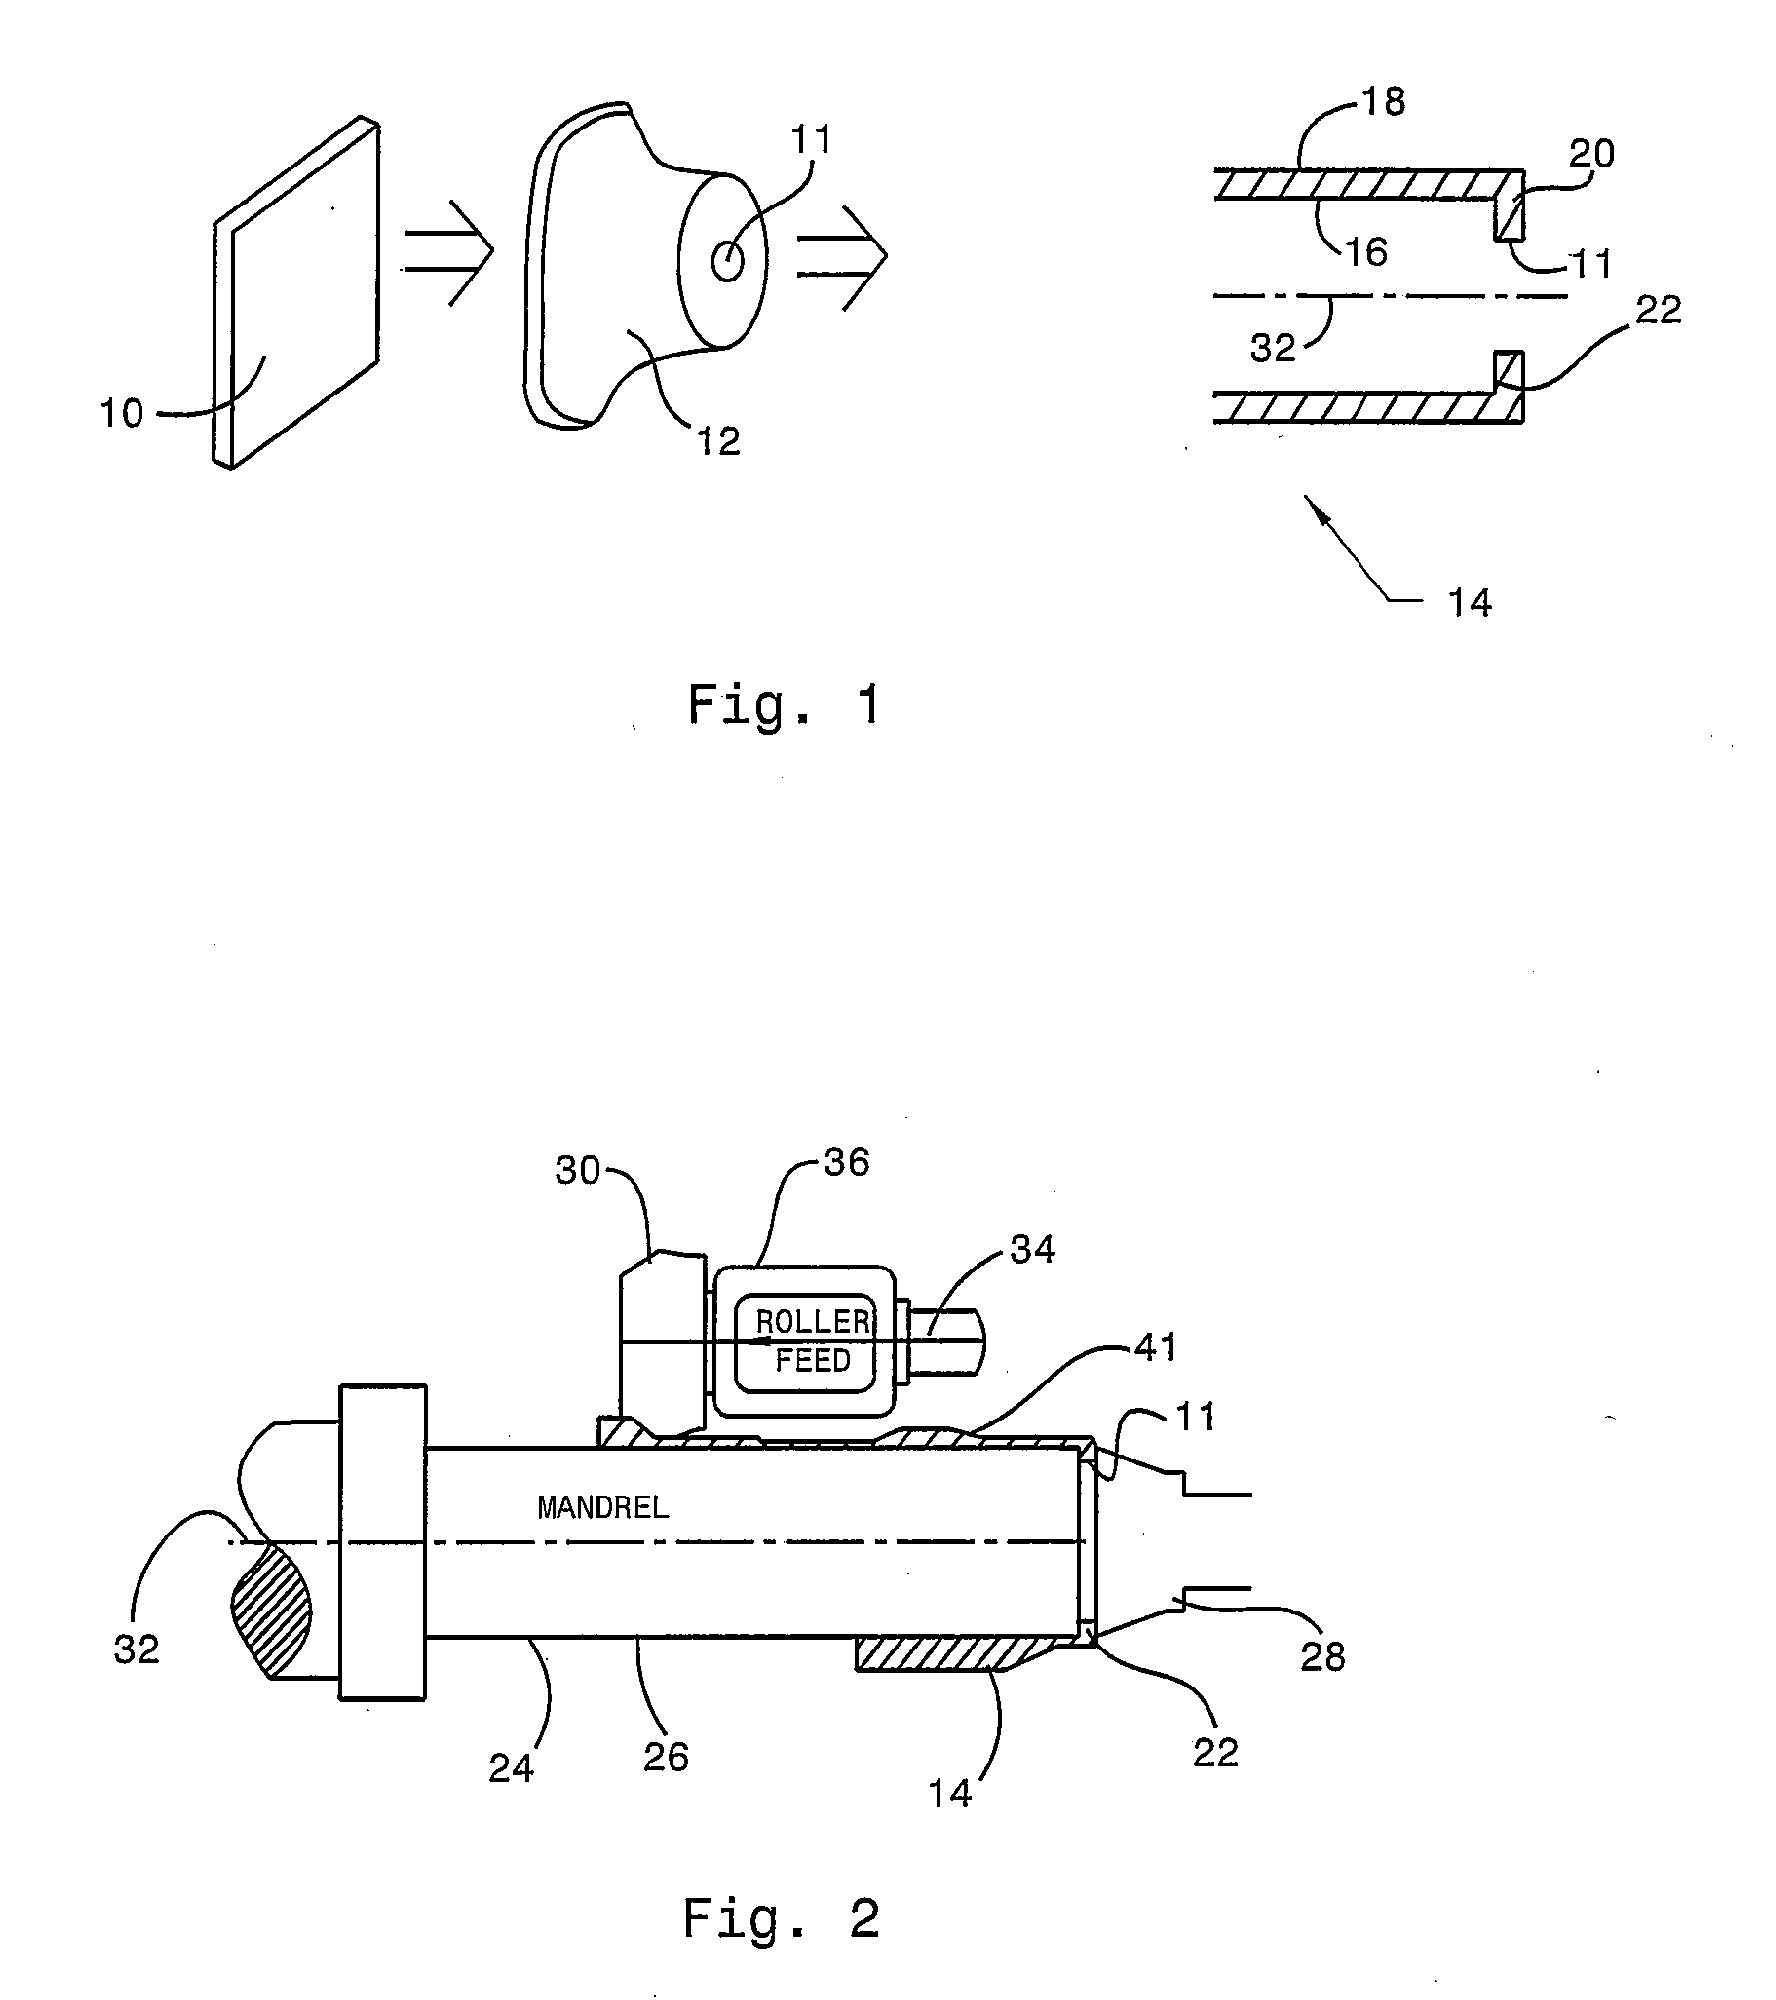 Method of forming a one piece component